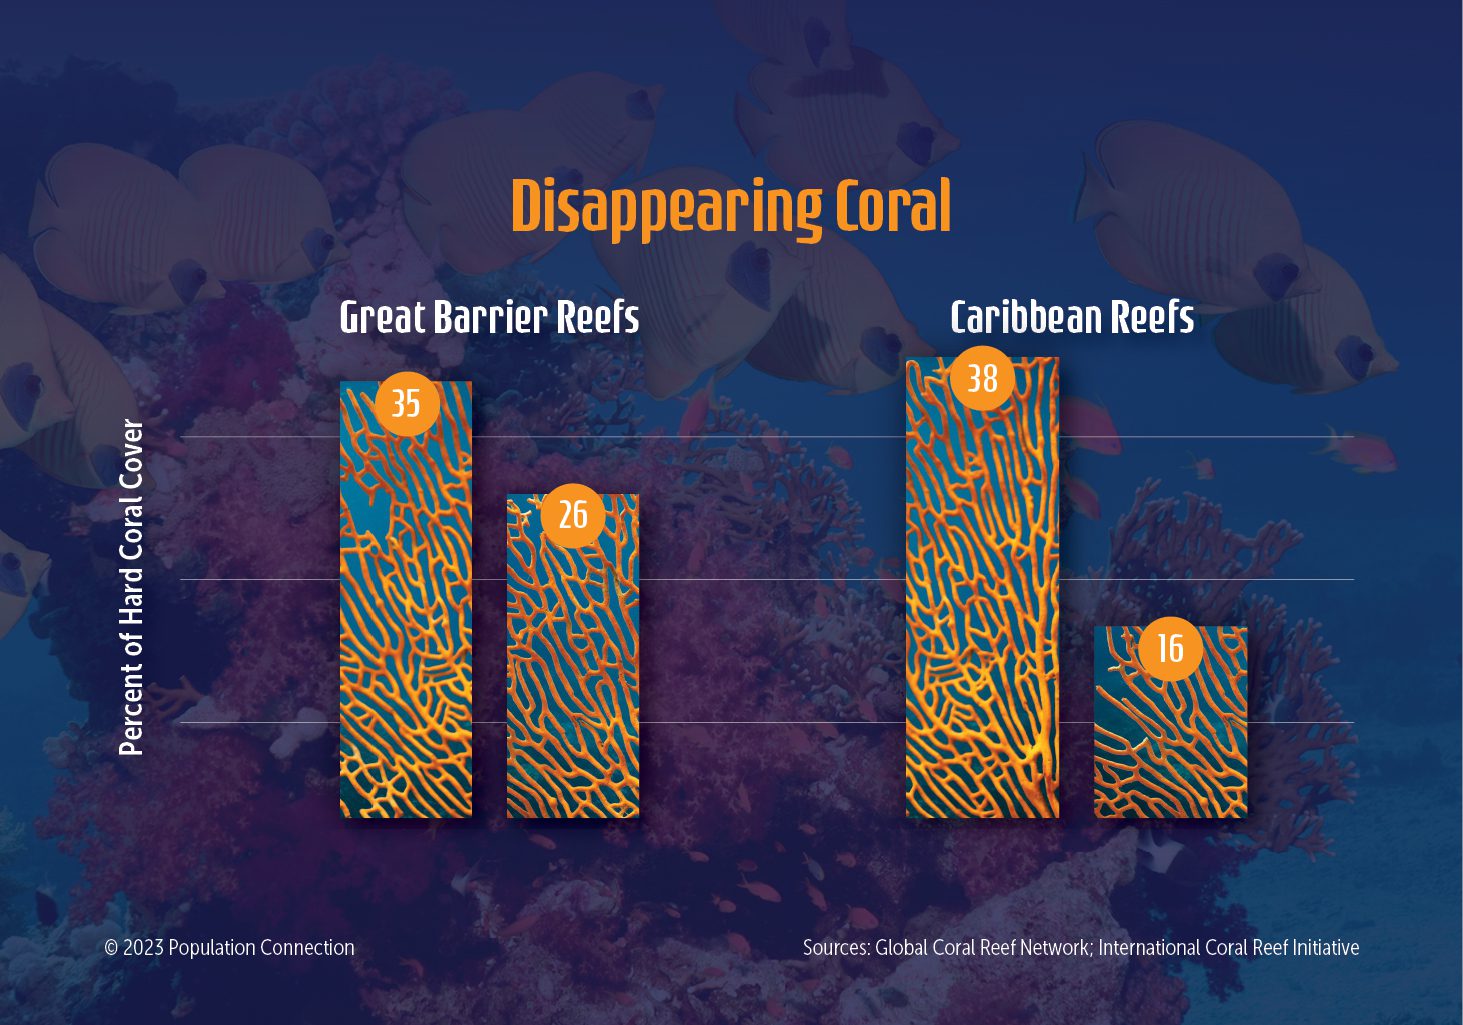 Graphs compare shrinking size of three coral reefs over time - Great Barrier Reef, Caribbean Reef, and West Indian Ocean Reef